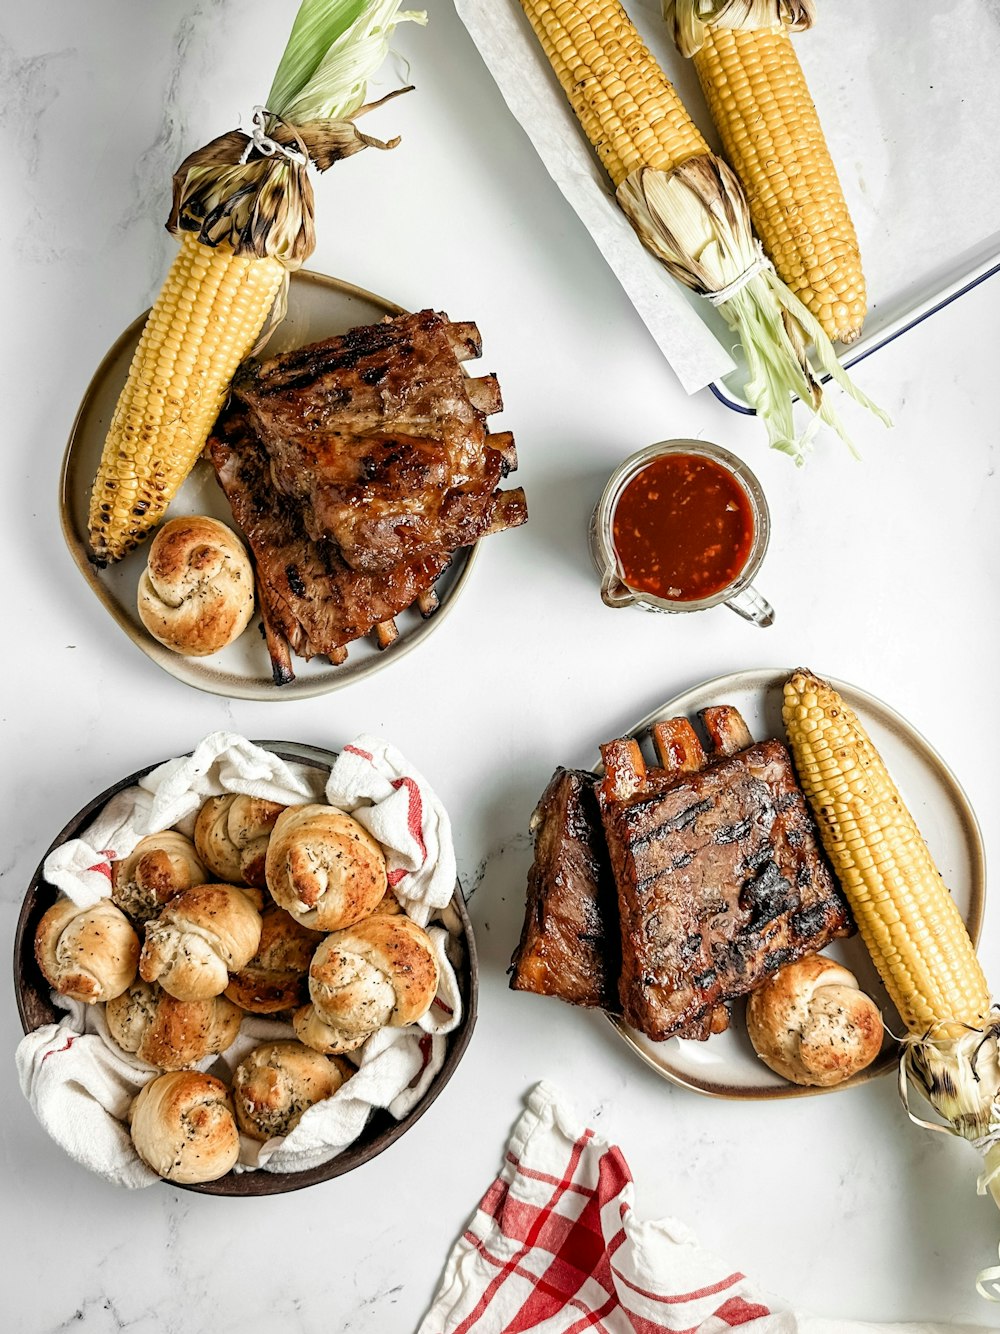 a table topped with plates of food next to corn on the cob